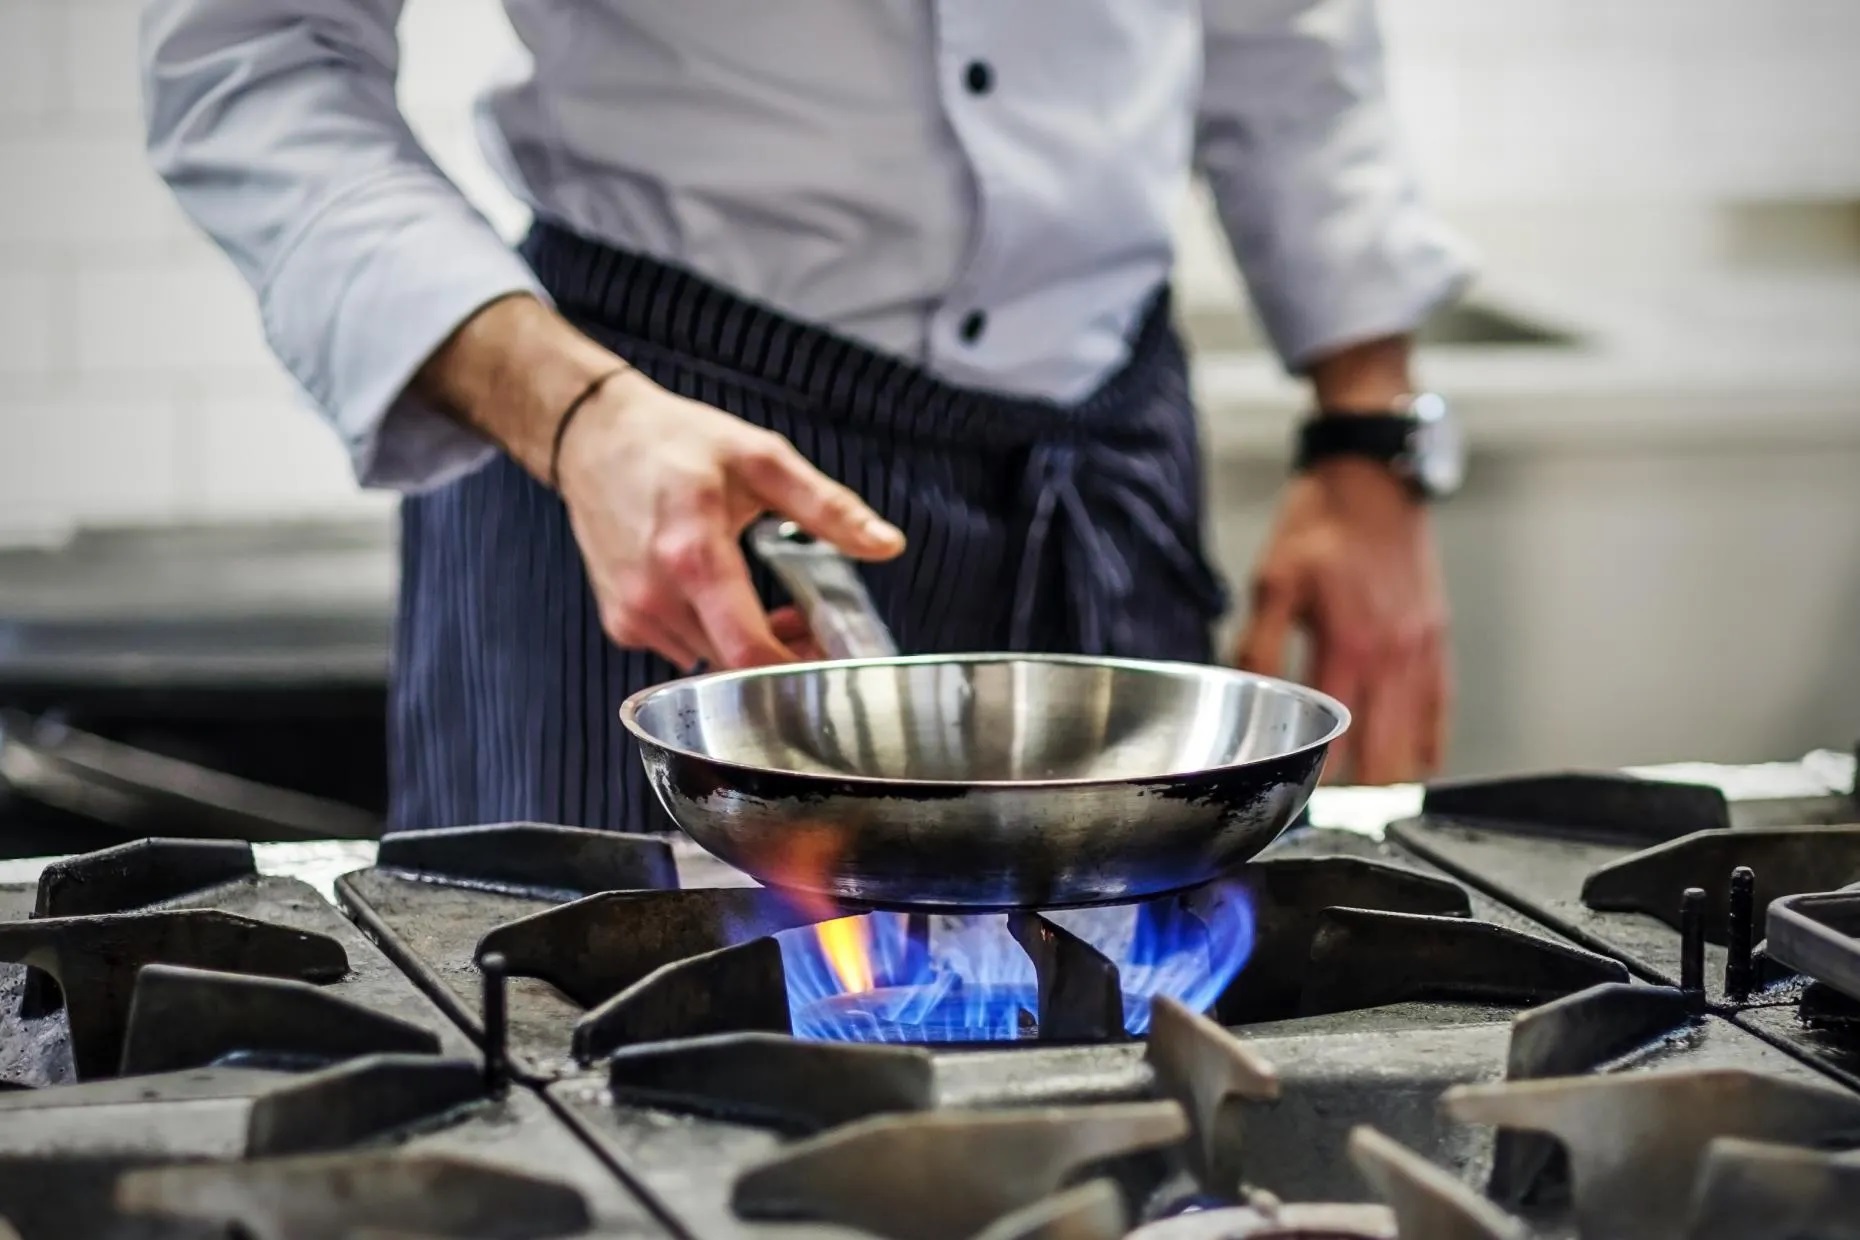 Stainless steel vs ceramic cookware